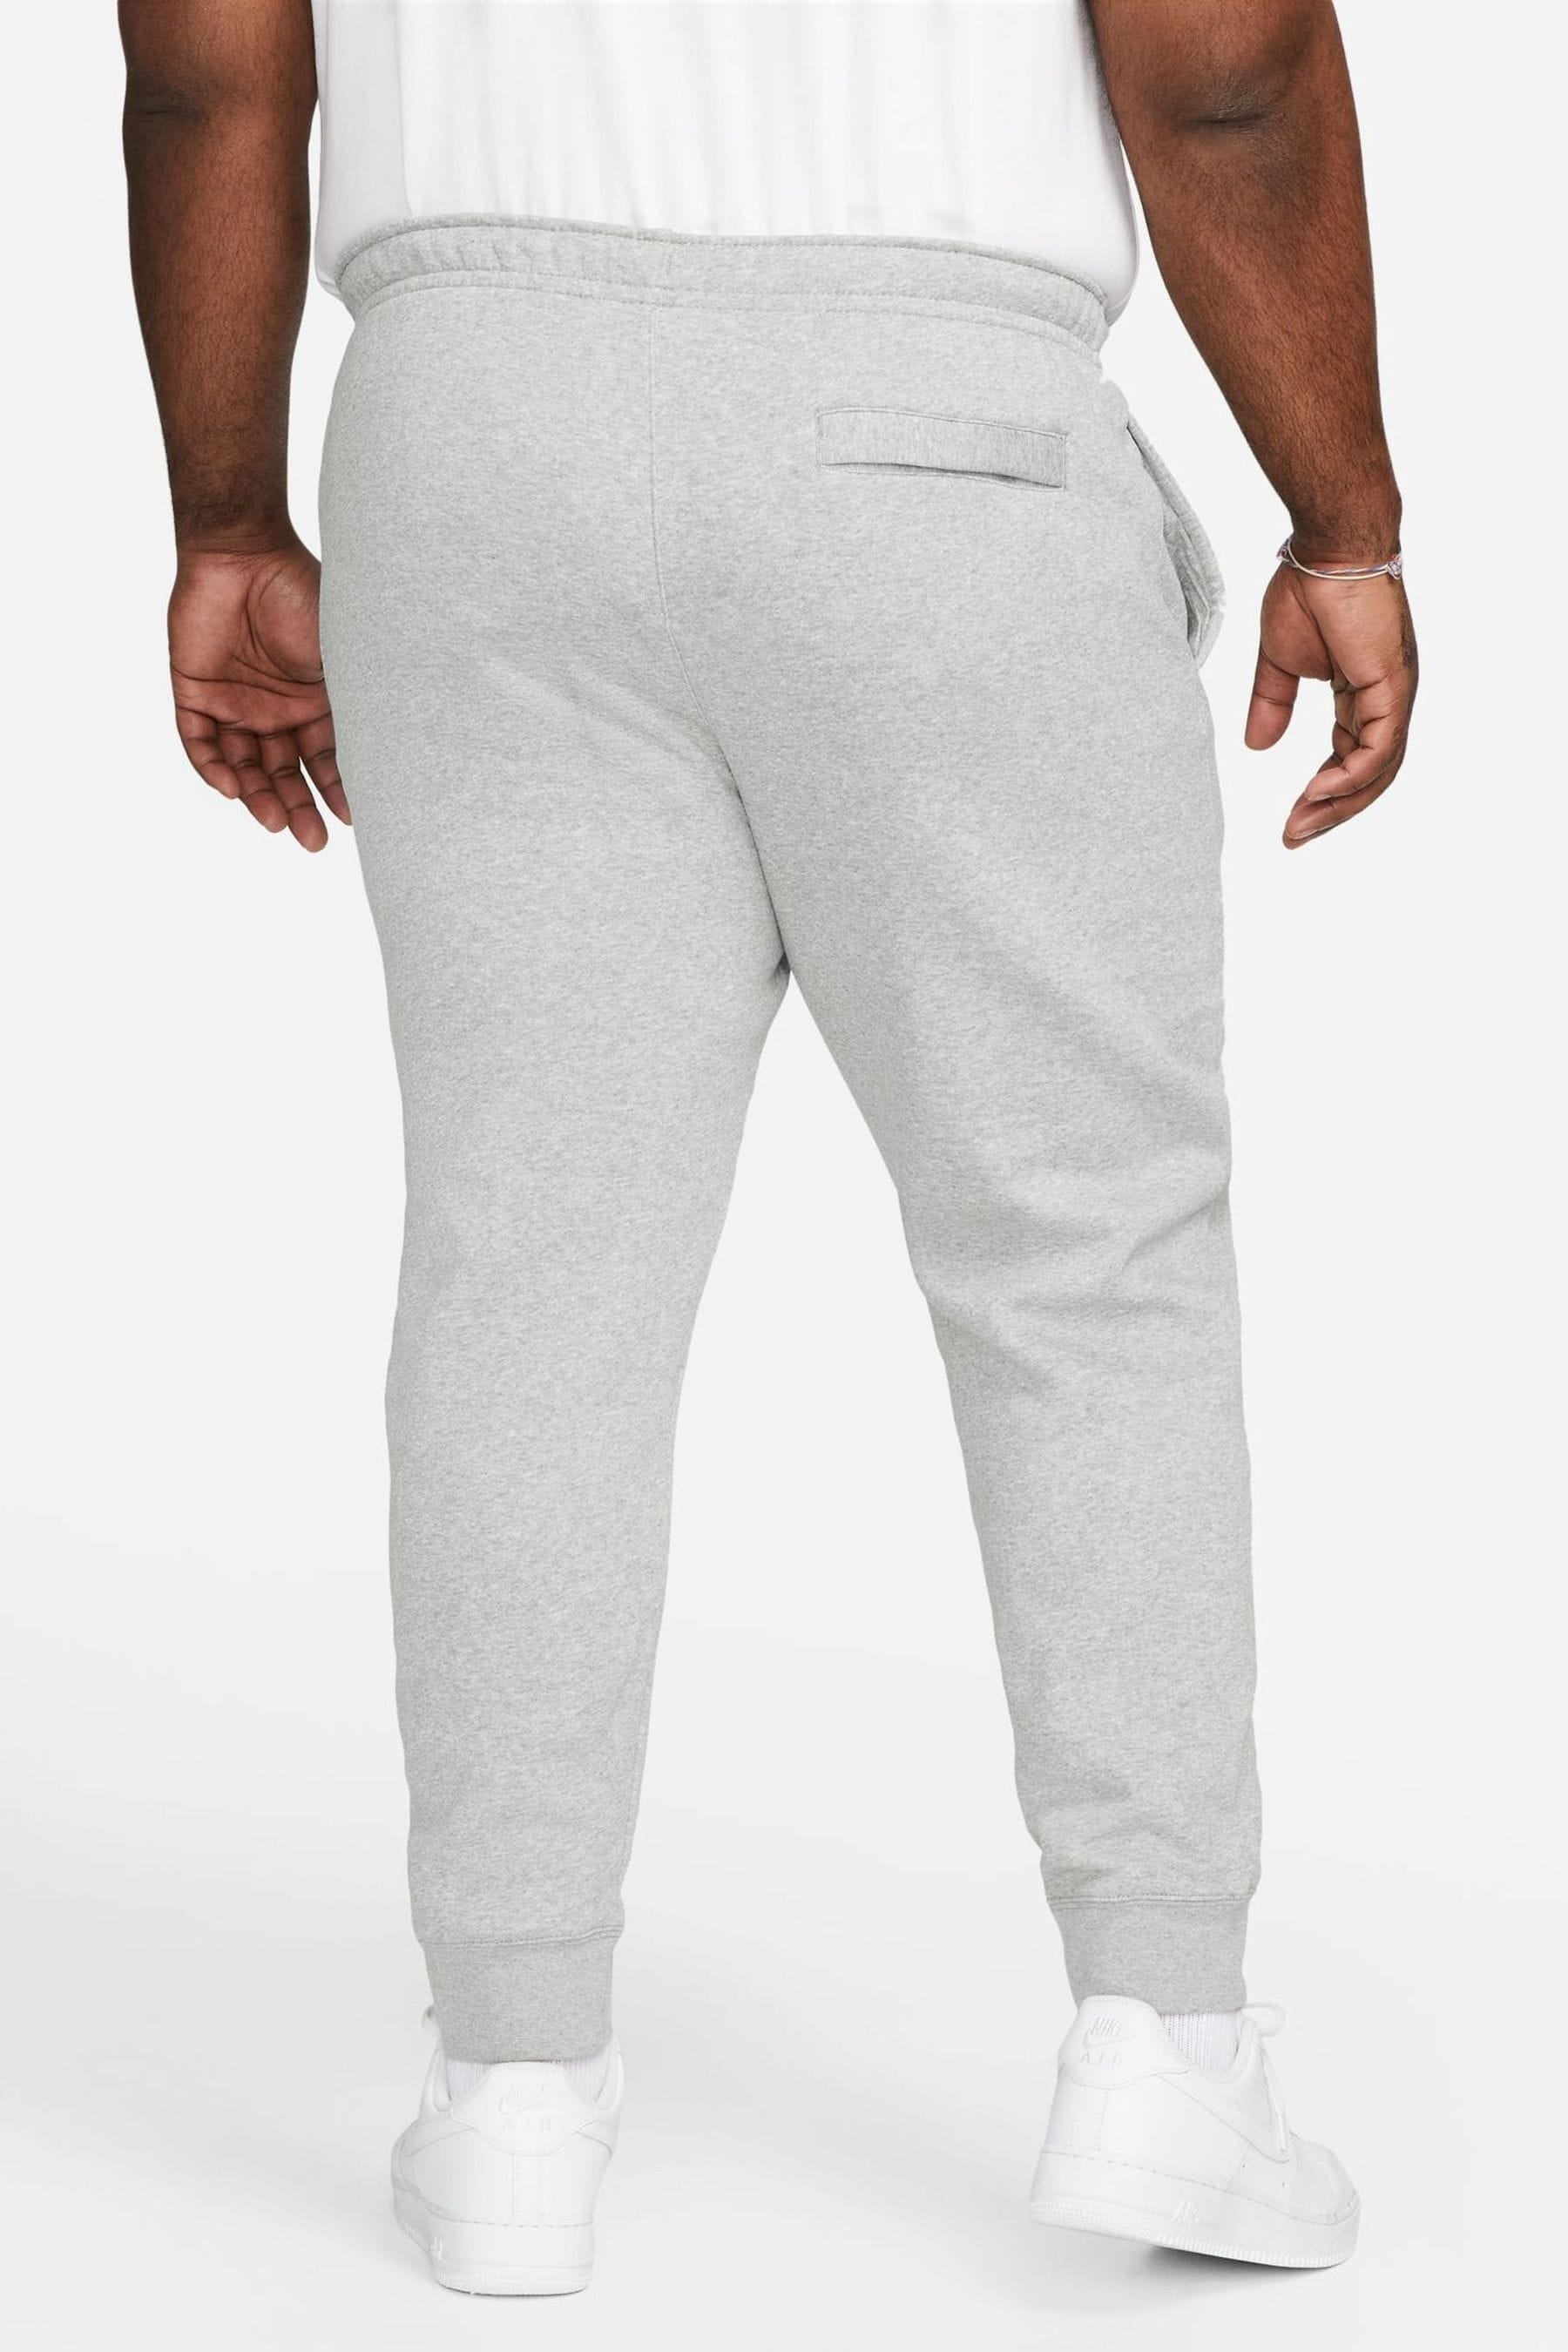 Buy Nike Grey Club Joggers from the Next UK online shop